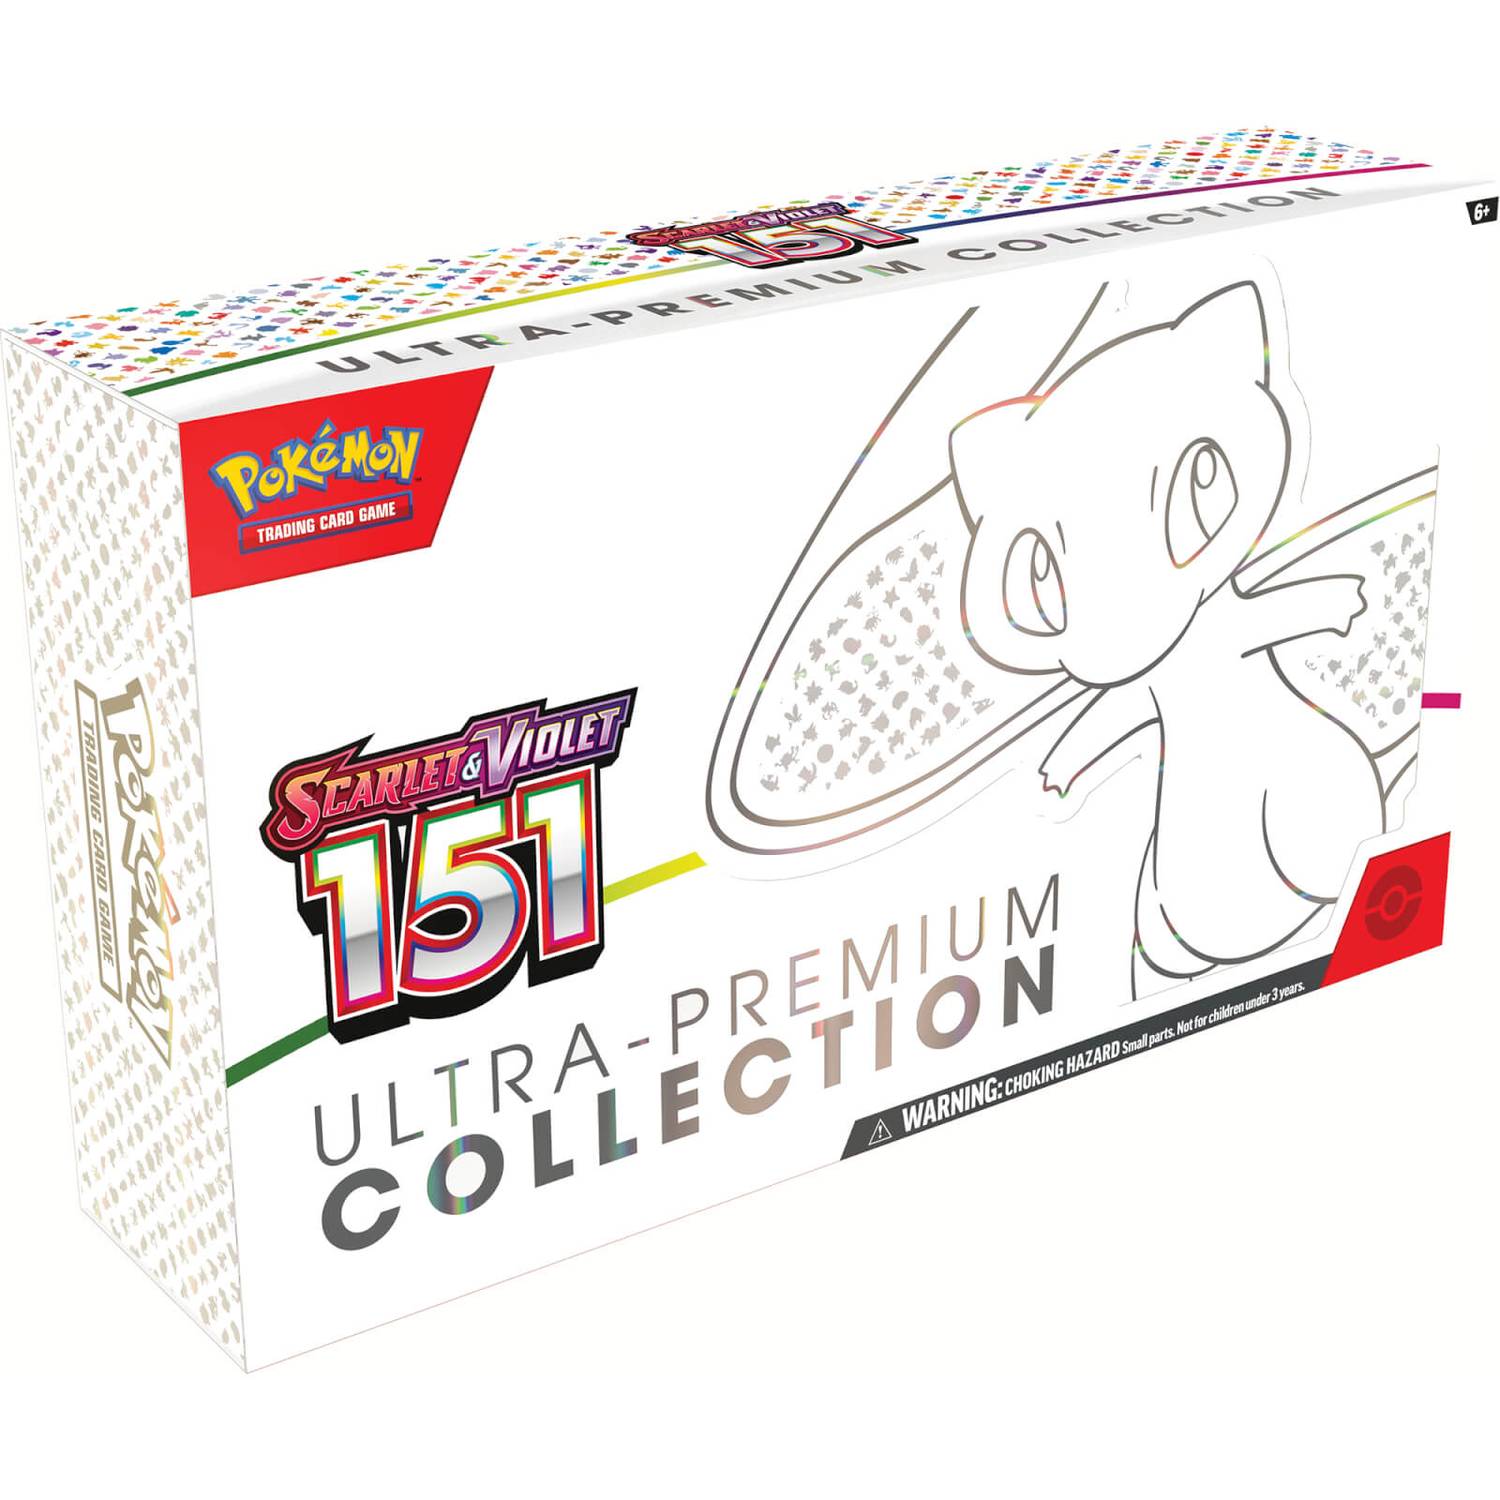 Pokemon TCG: Scarlet & Violet 3.5: 151 – Ultra Premium Collection - Release Date 22/09/23 - Loaded Dice Barry Vale of Glamorgan CF64 3HD